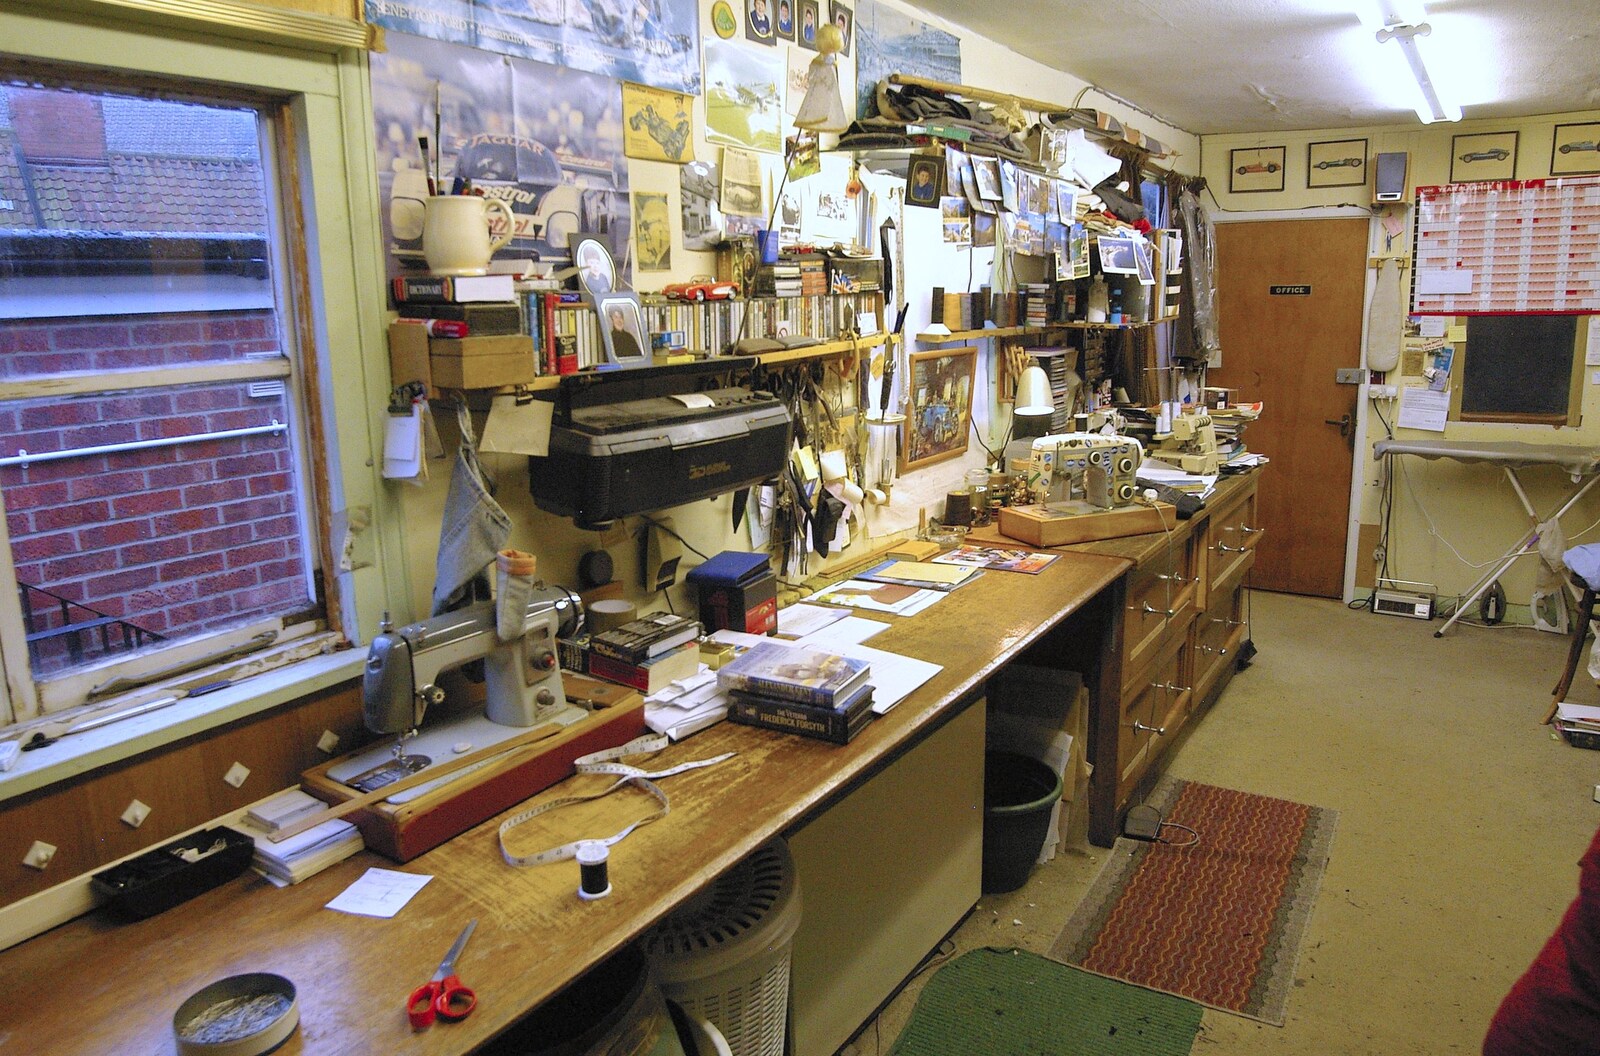 The Hopgood's repair and alterations room from A Portrait of Hopgoods: Gentlemen's Outfitters, Diss, Norfolk - 4th January 2006